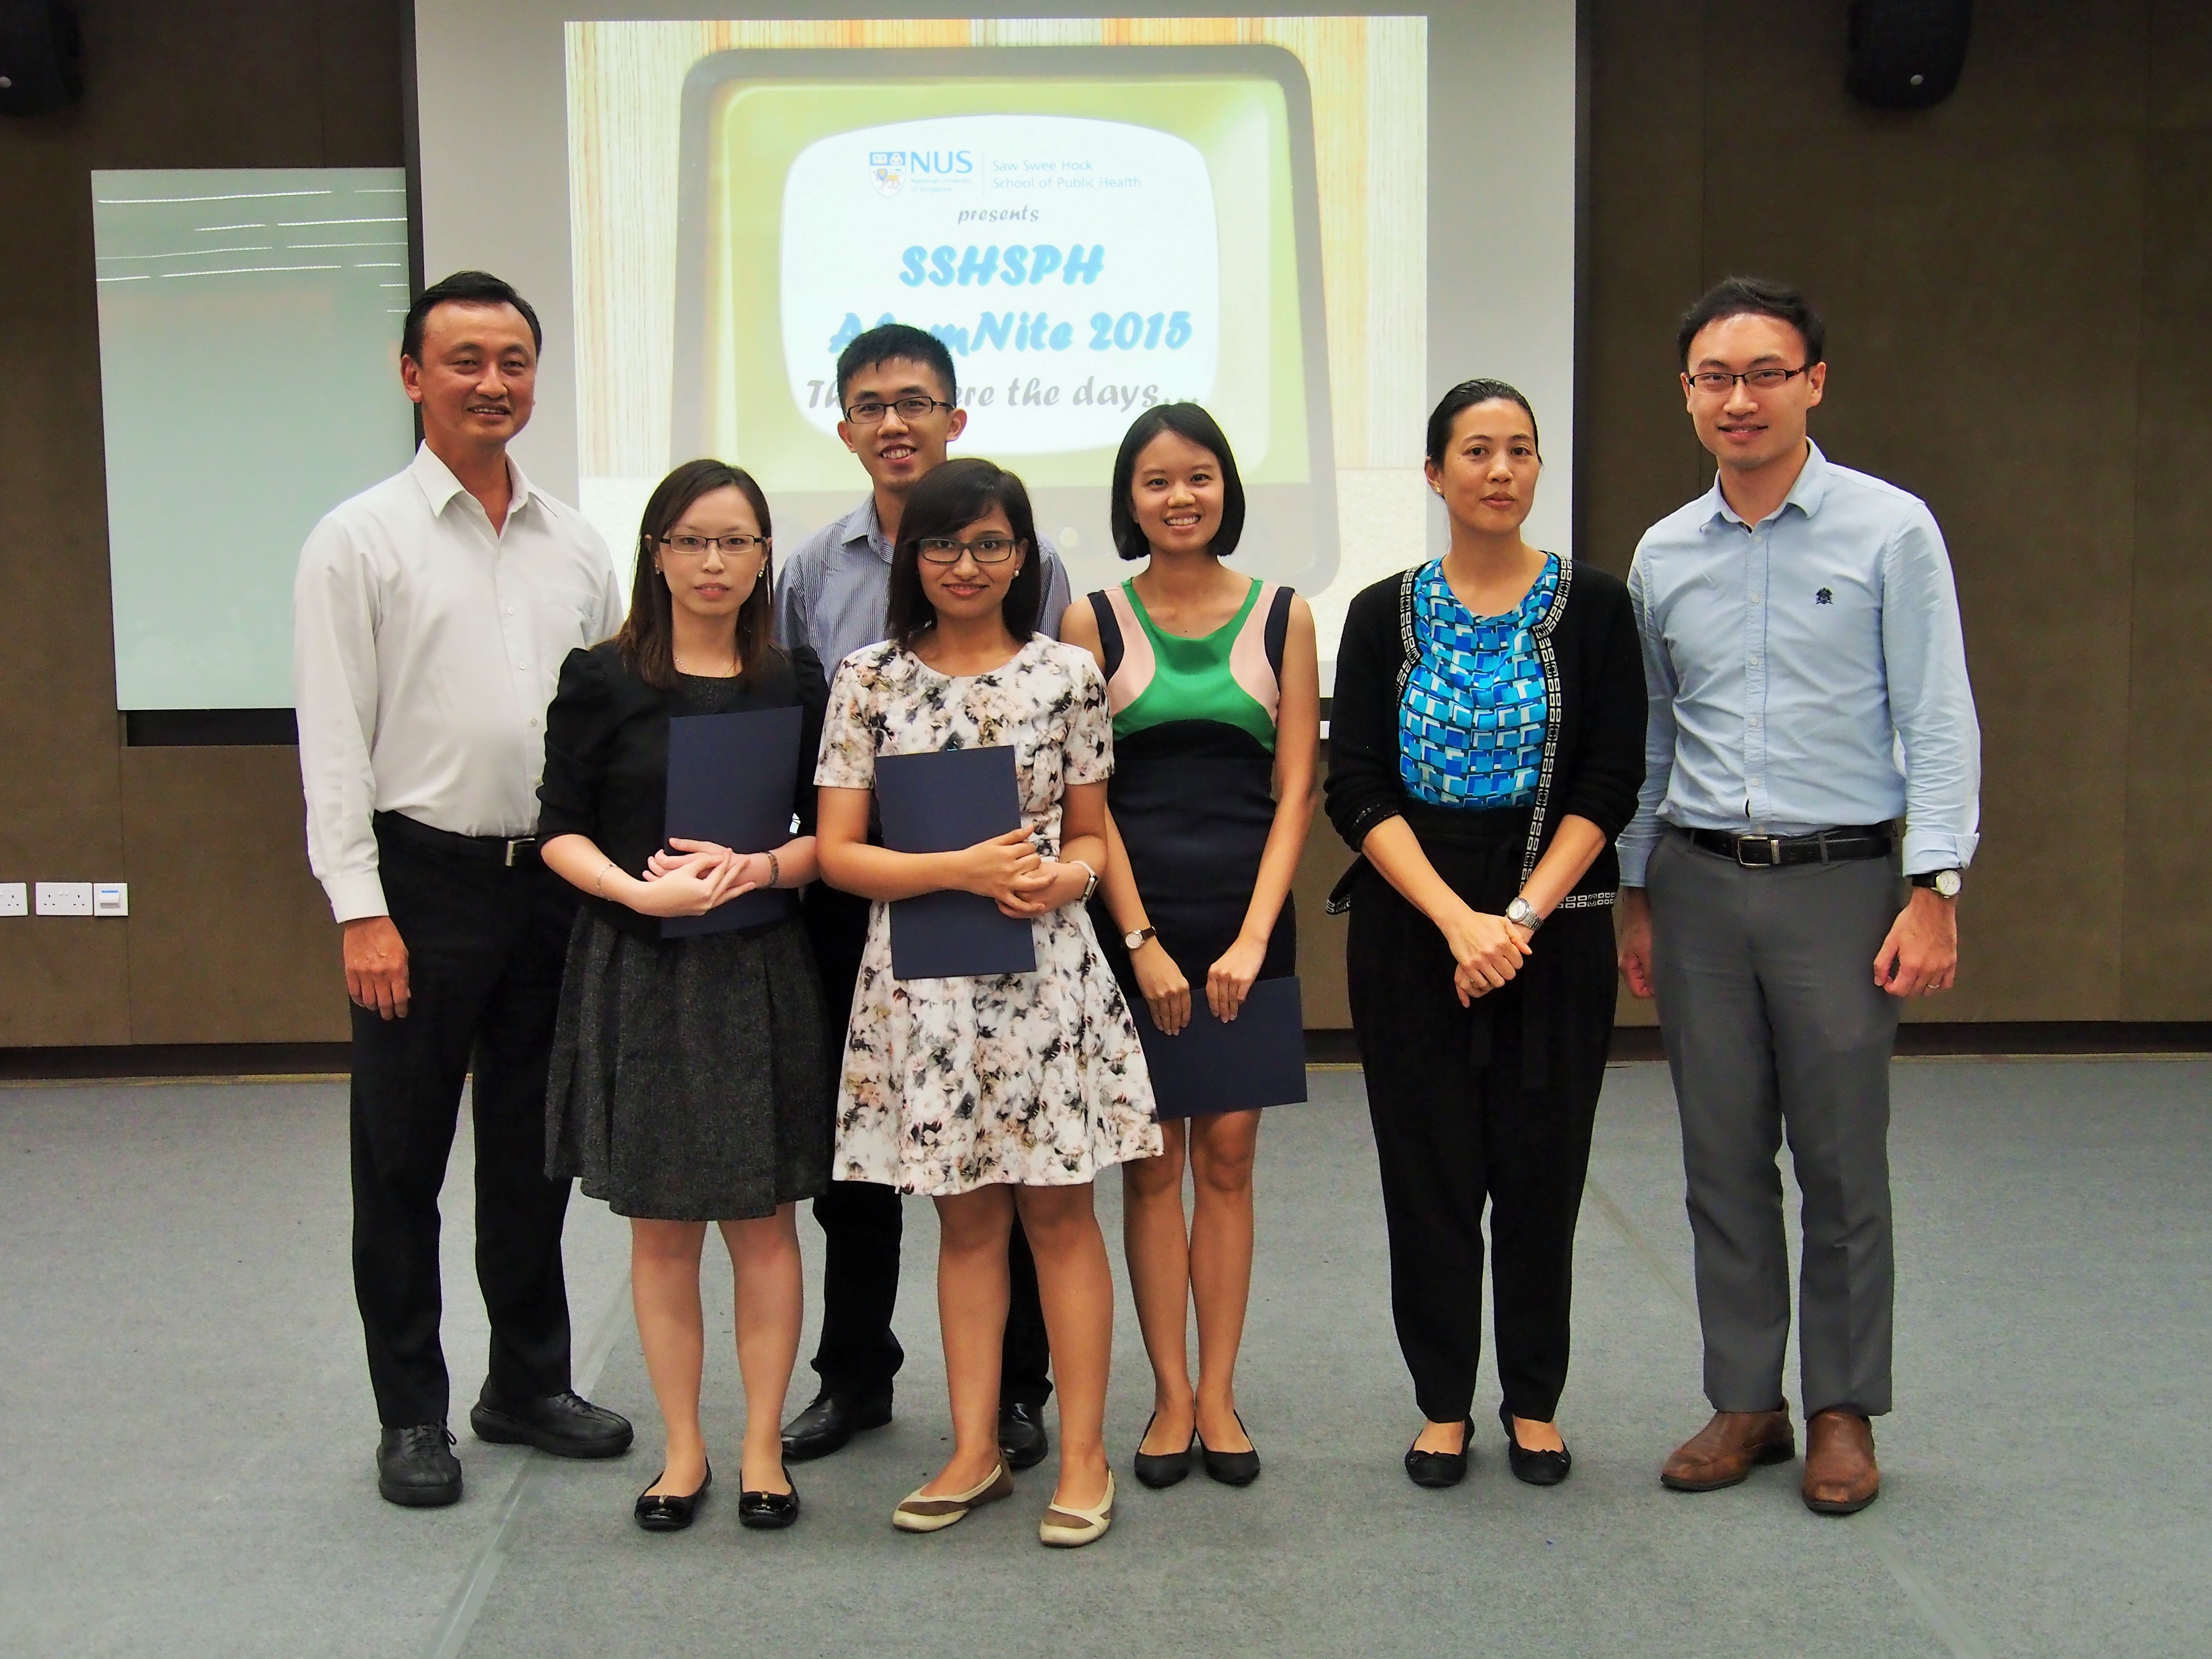 Dean, Prof Chia Kee Seng and Vice Dean (Education) A/Prof Jeannette Lee with the award recipients: (from left) Ms Er Pei Ling, Dr Hwang Yi-Fu Jeff, Dr Tyagi Shilpa, Ms Ng Xin Ru Marie and Dr Pang Junxiong Vincent.